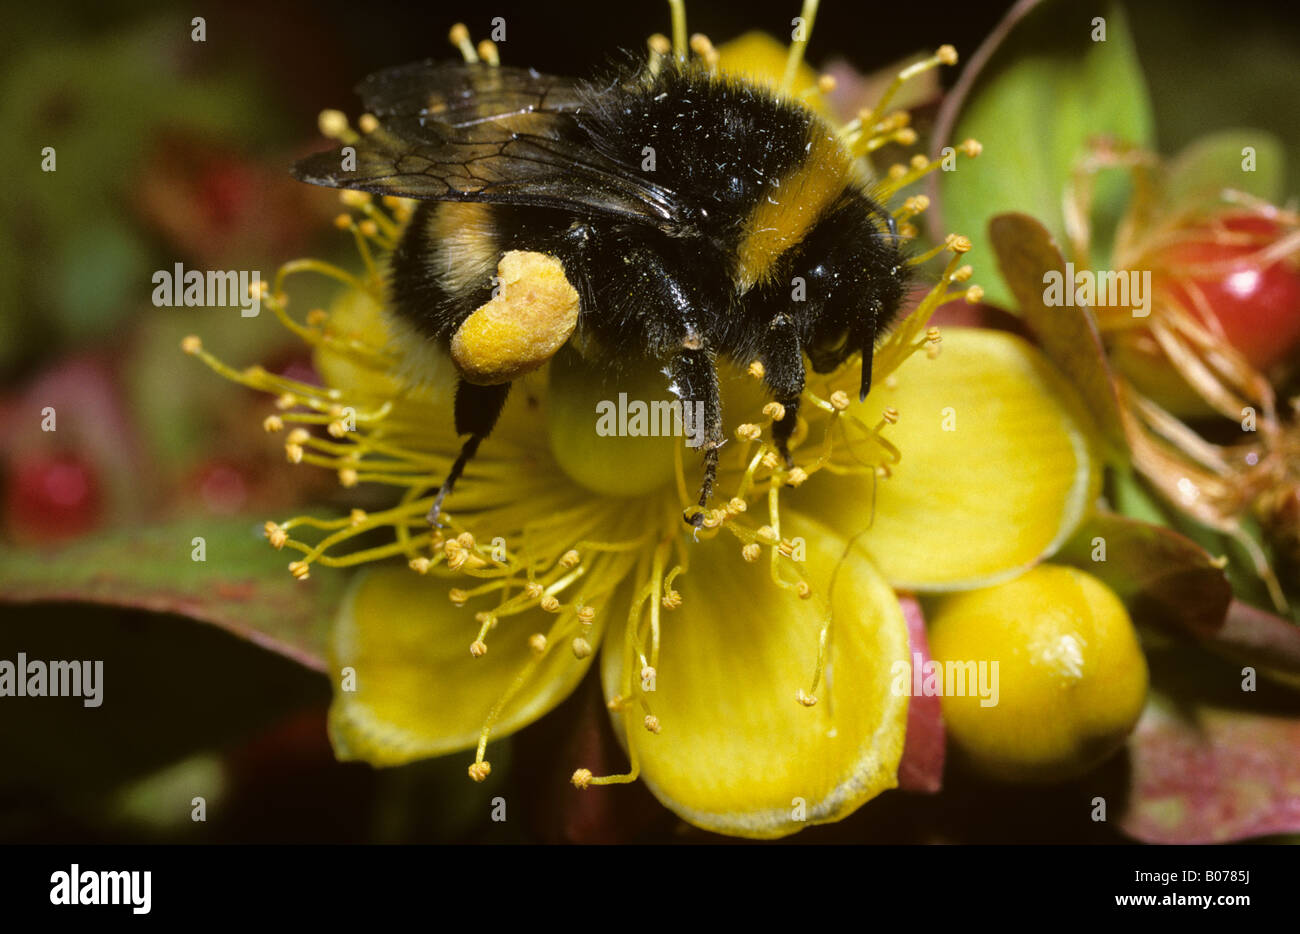 Buff tailed bumble bee Bombus terrestris Apidae worker with well filled pollen baskets foraging on flowers UK Stock Photo